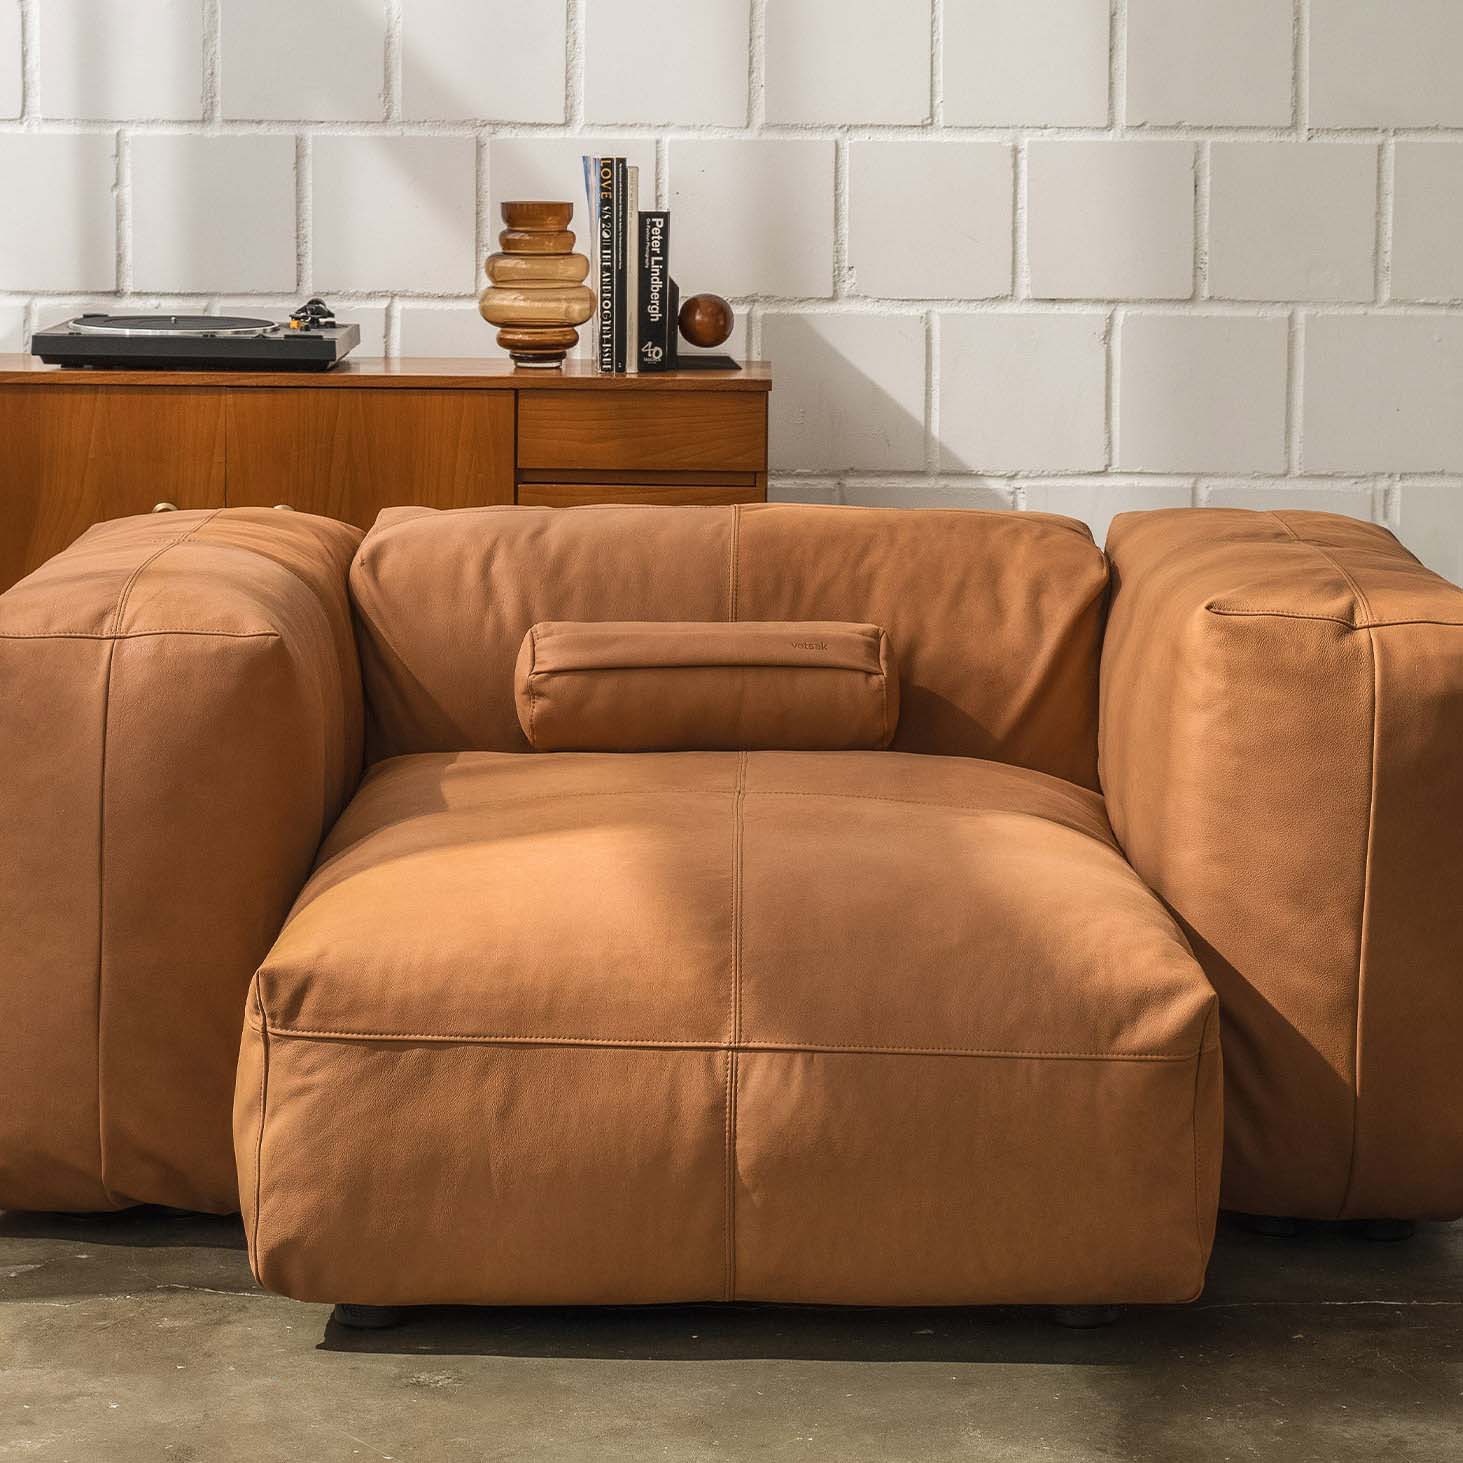 Two Seat Lounge Sofa S Leather Brown